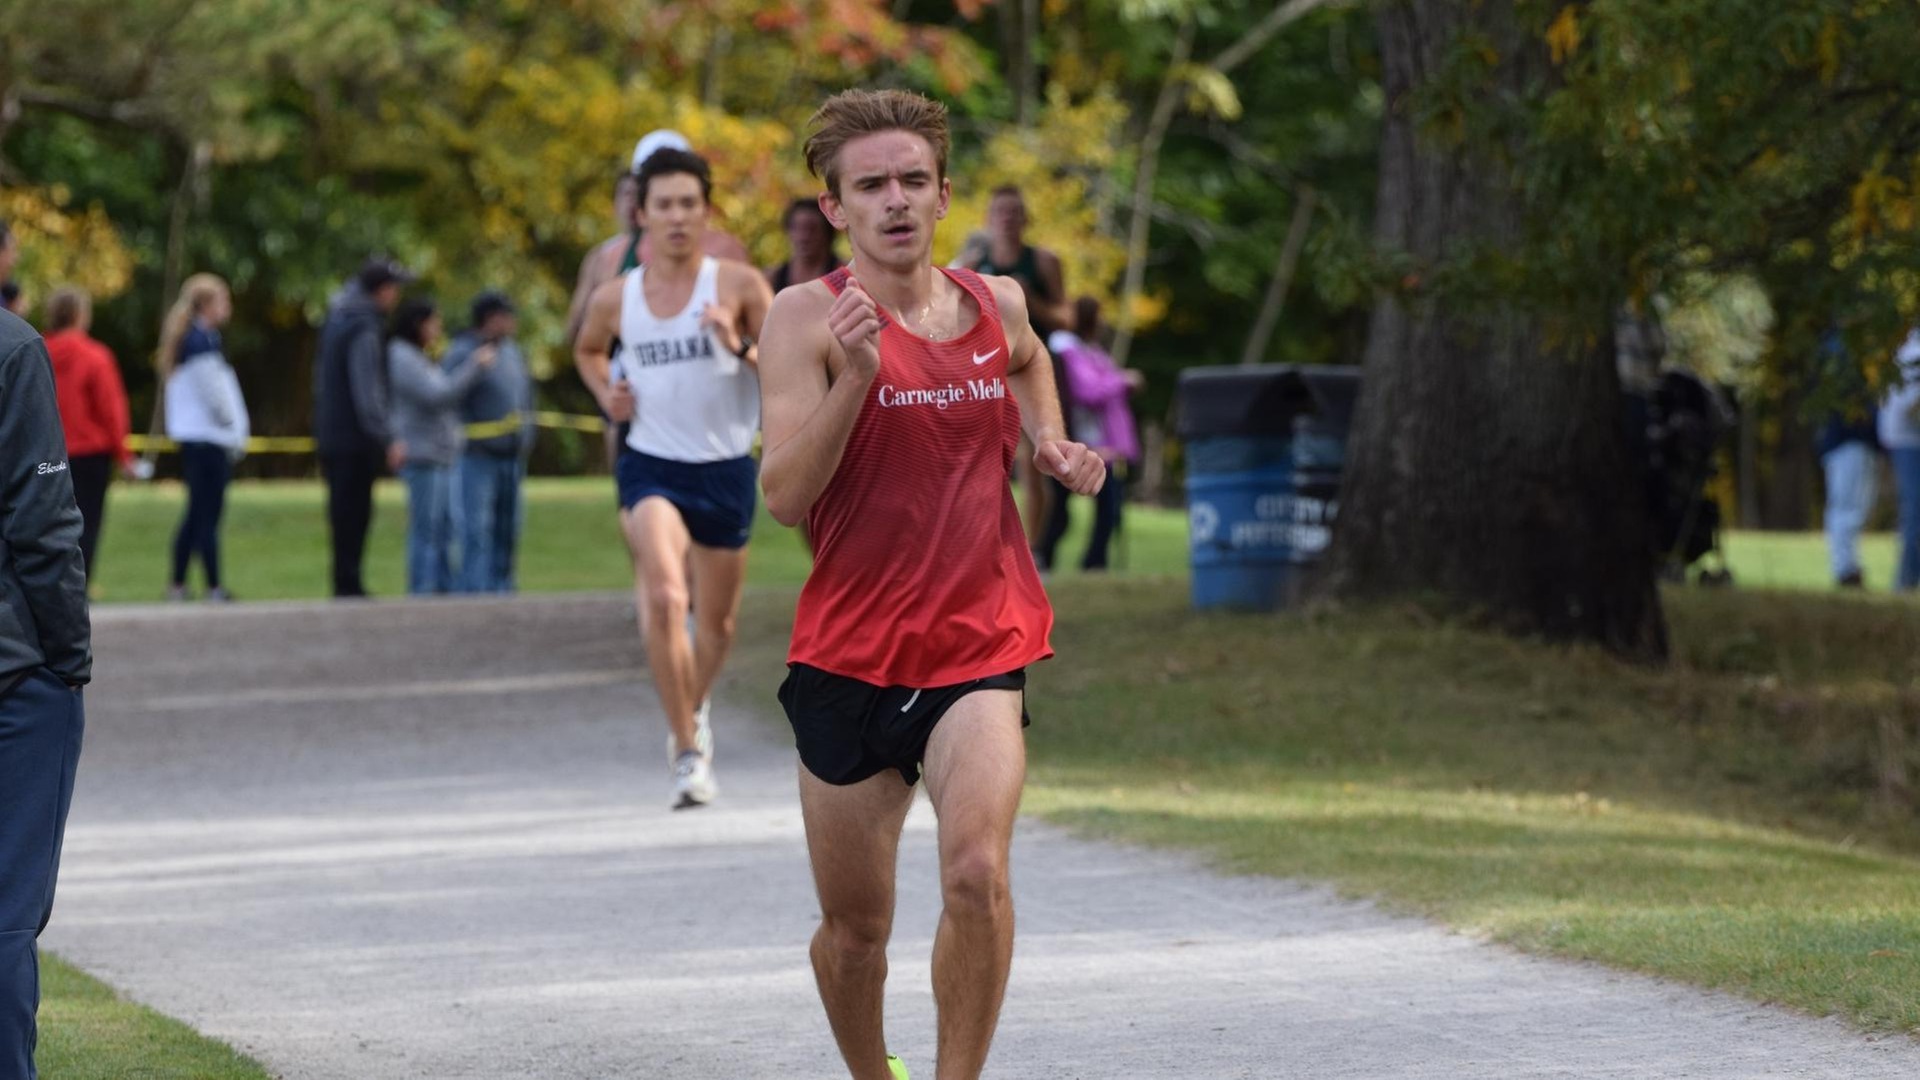 men's cross country runner wearing red jersey and black shorts runs on trail ahead of runners with fans cheering on the left